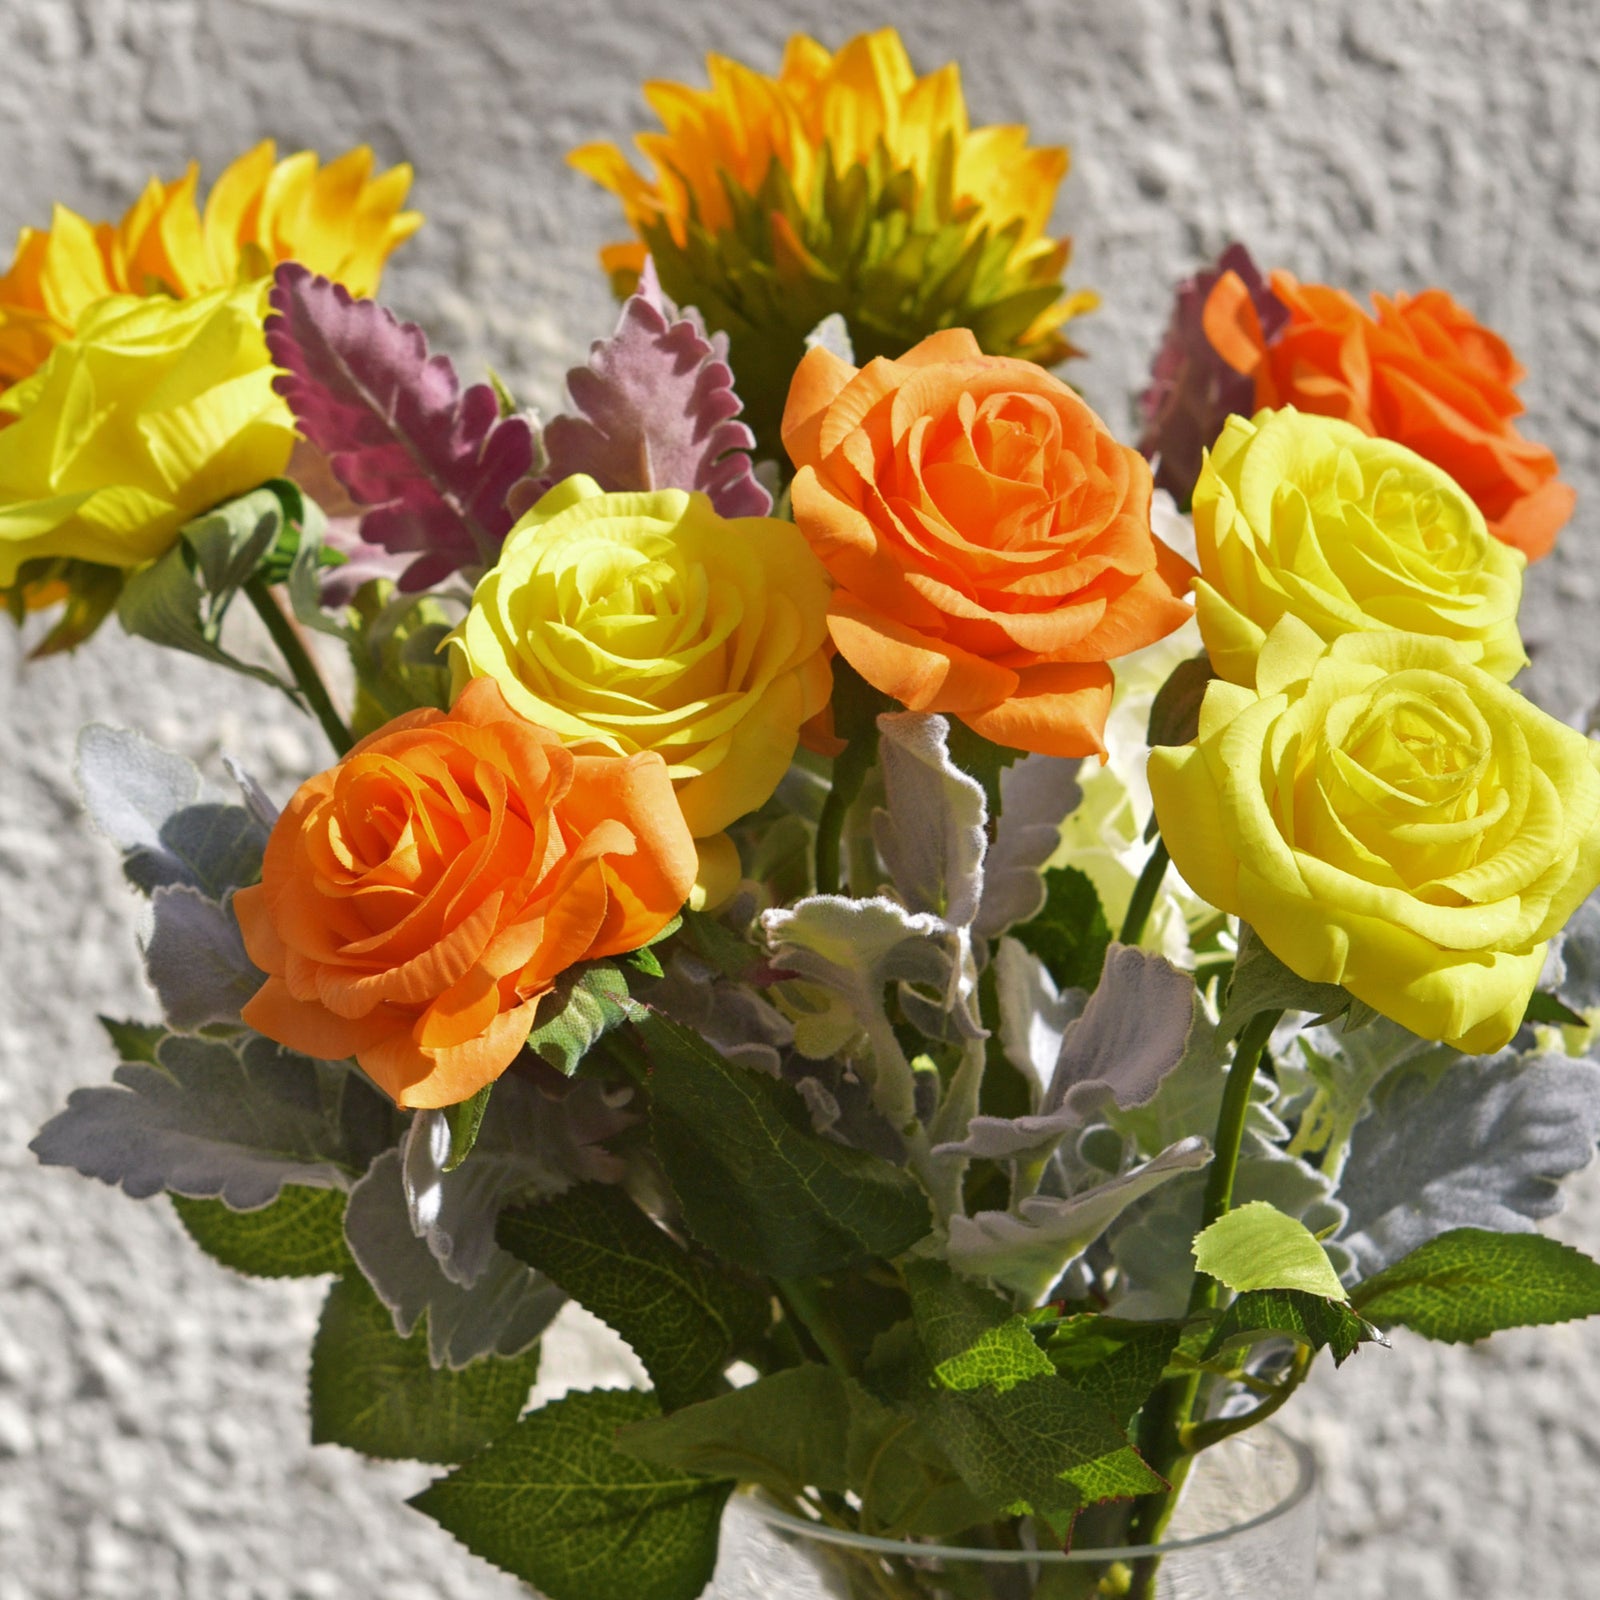 Yellow Real Touch Silk Artificial Flowers ‘Petals Feel and Look like Fresh Roses 10 Stems